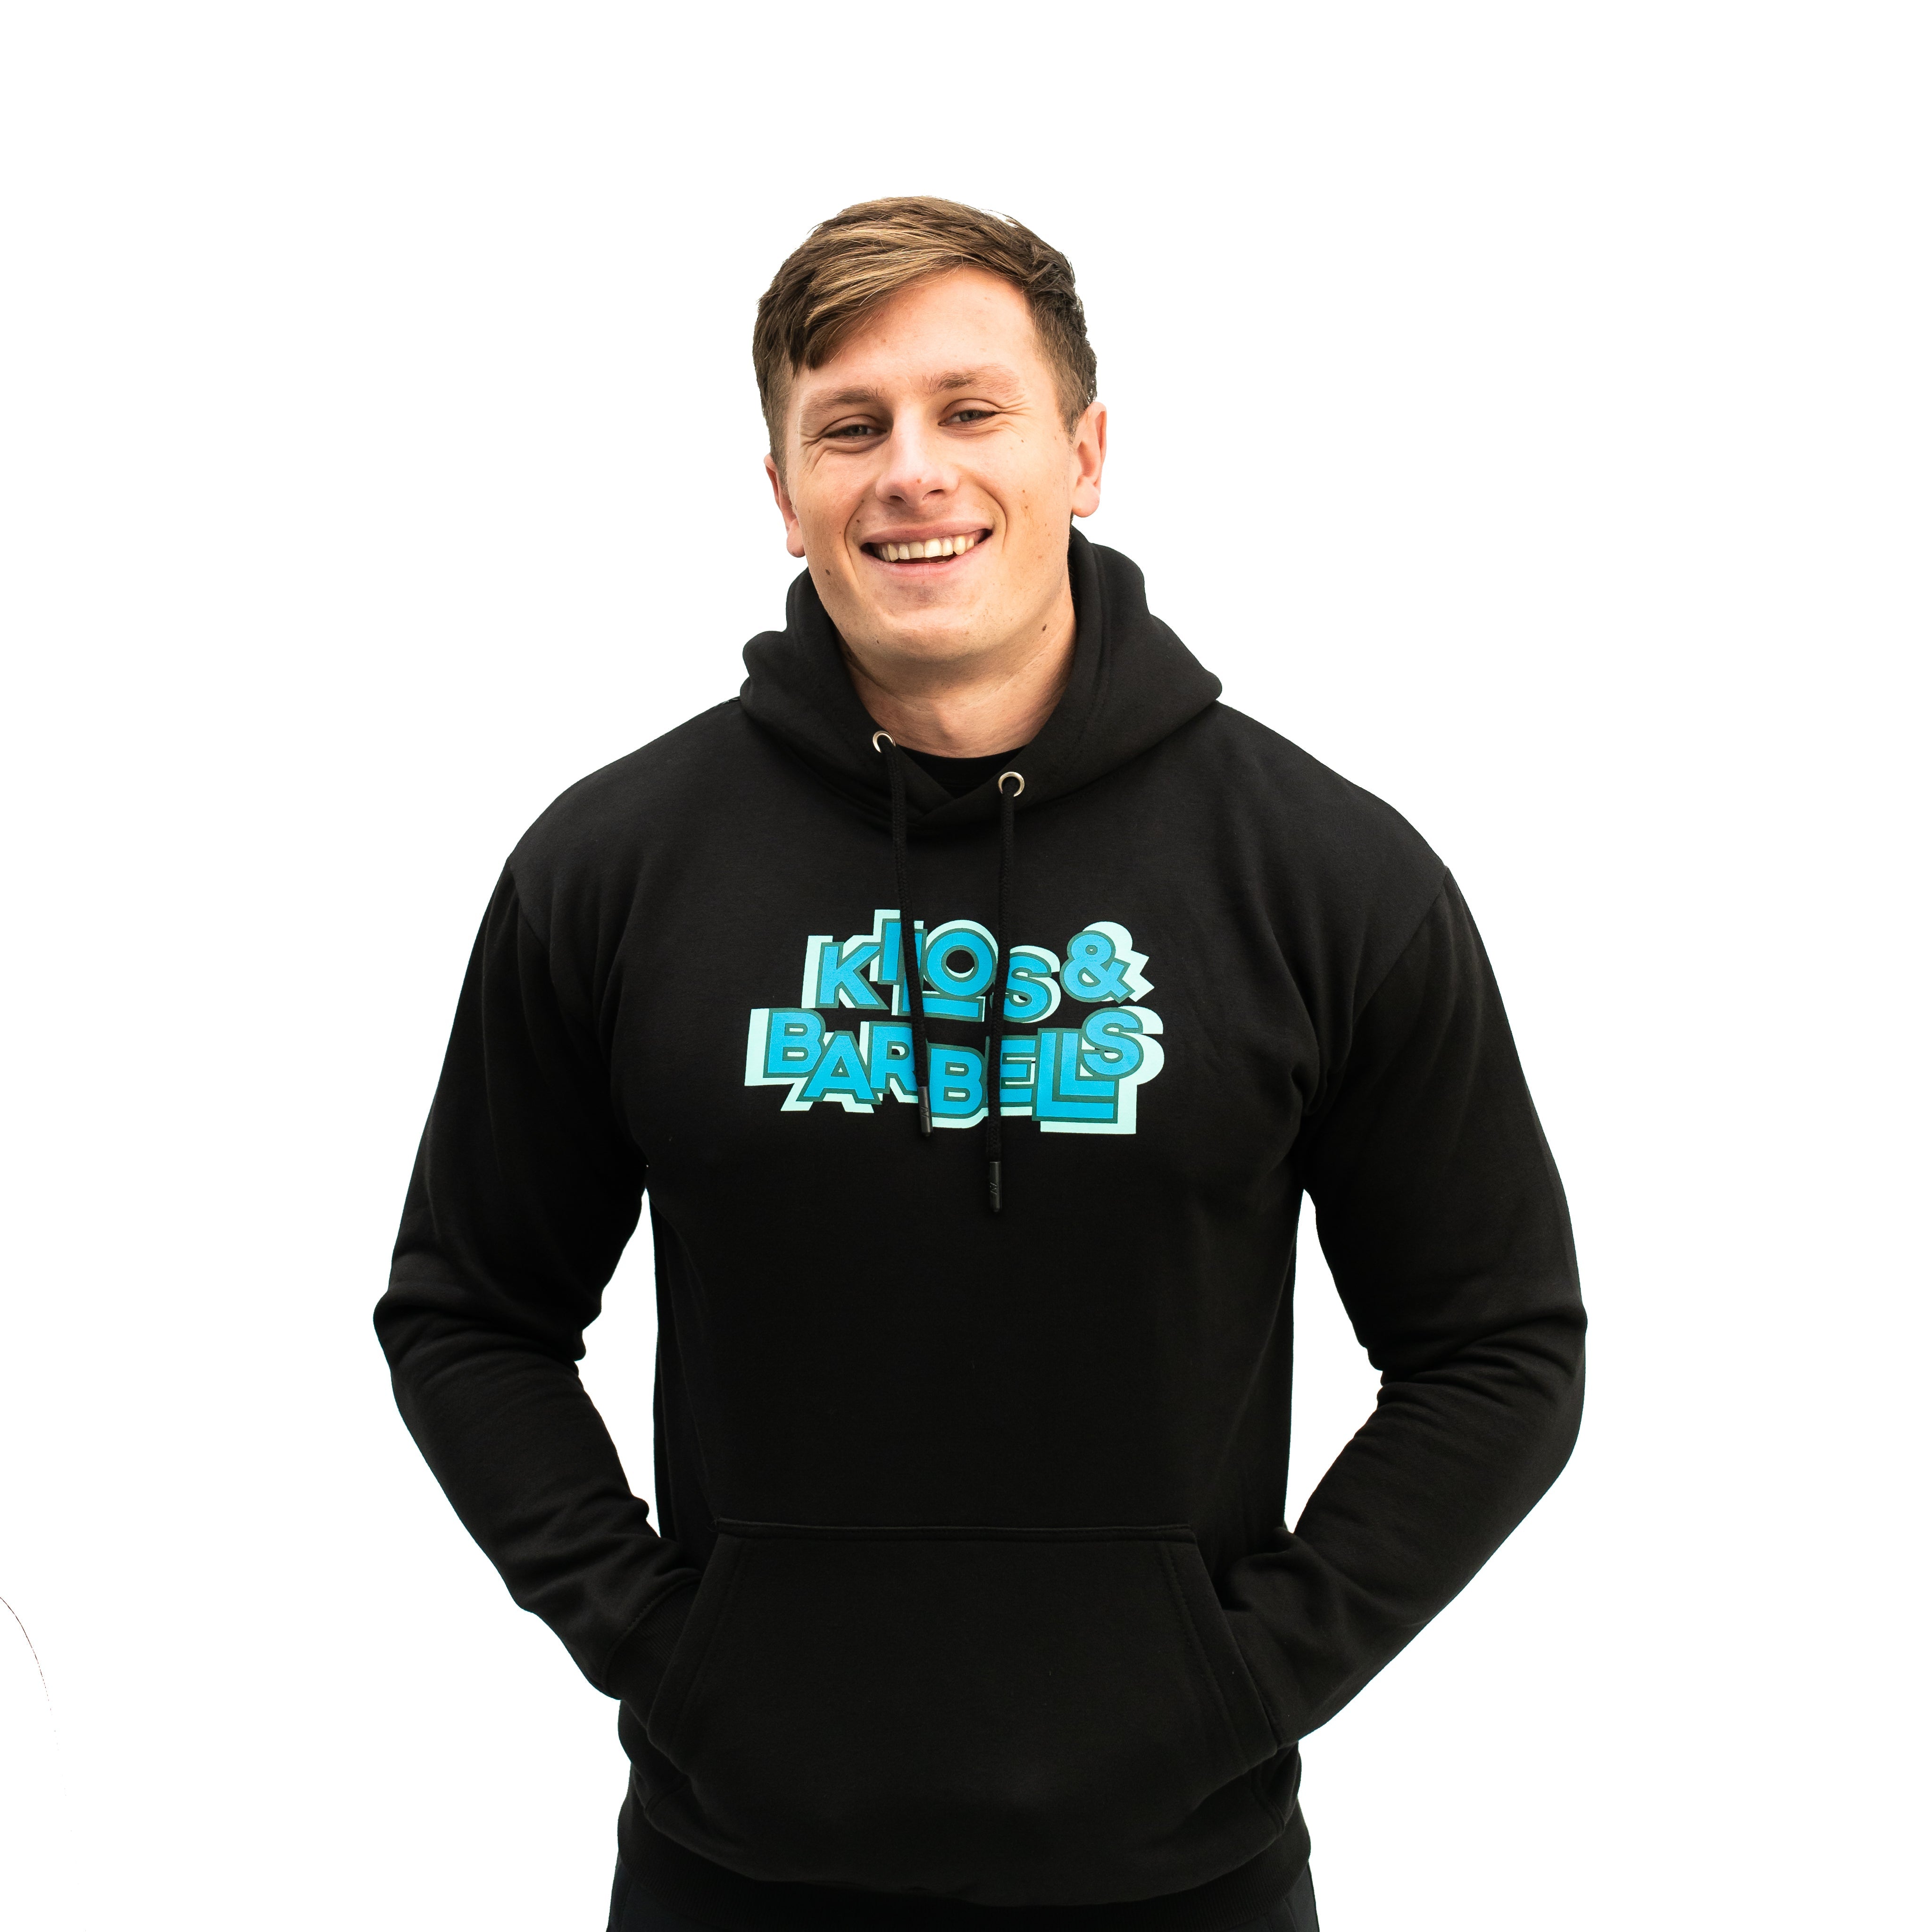 Kilos and Barbells Aqua Bar Grip Hoodie is great in and out the gym. Purchase Kilos and Barbells Aqua Bar Grip Hoodie from A7 UK and A7 Europe. The silicone grip helps with slippery commercial benches and bars and anchors the barbell to your back. Kilos and Barbells Aqua Bar Grip Hoodie is a great gift for powerlifters. A7UK has the best Powerlifting apparel for all your workouts. Available in UK and Europe including France, Italy, Germany, the Netherlands, Sweden and Poland.